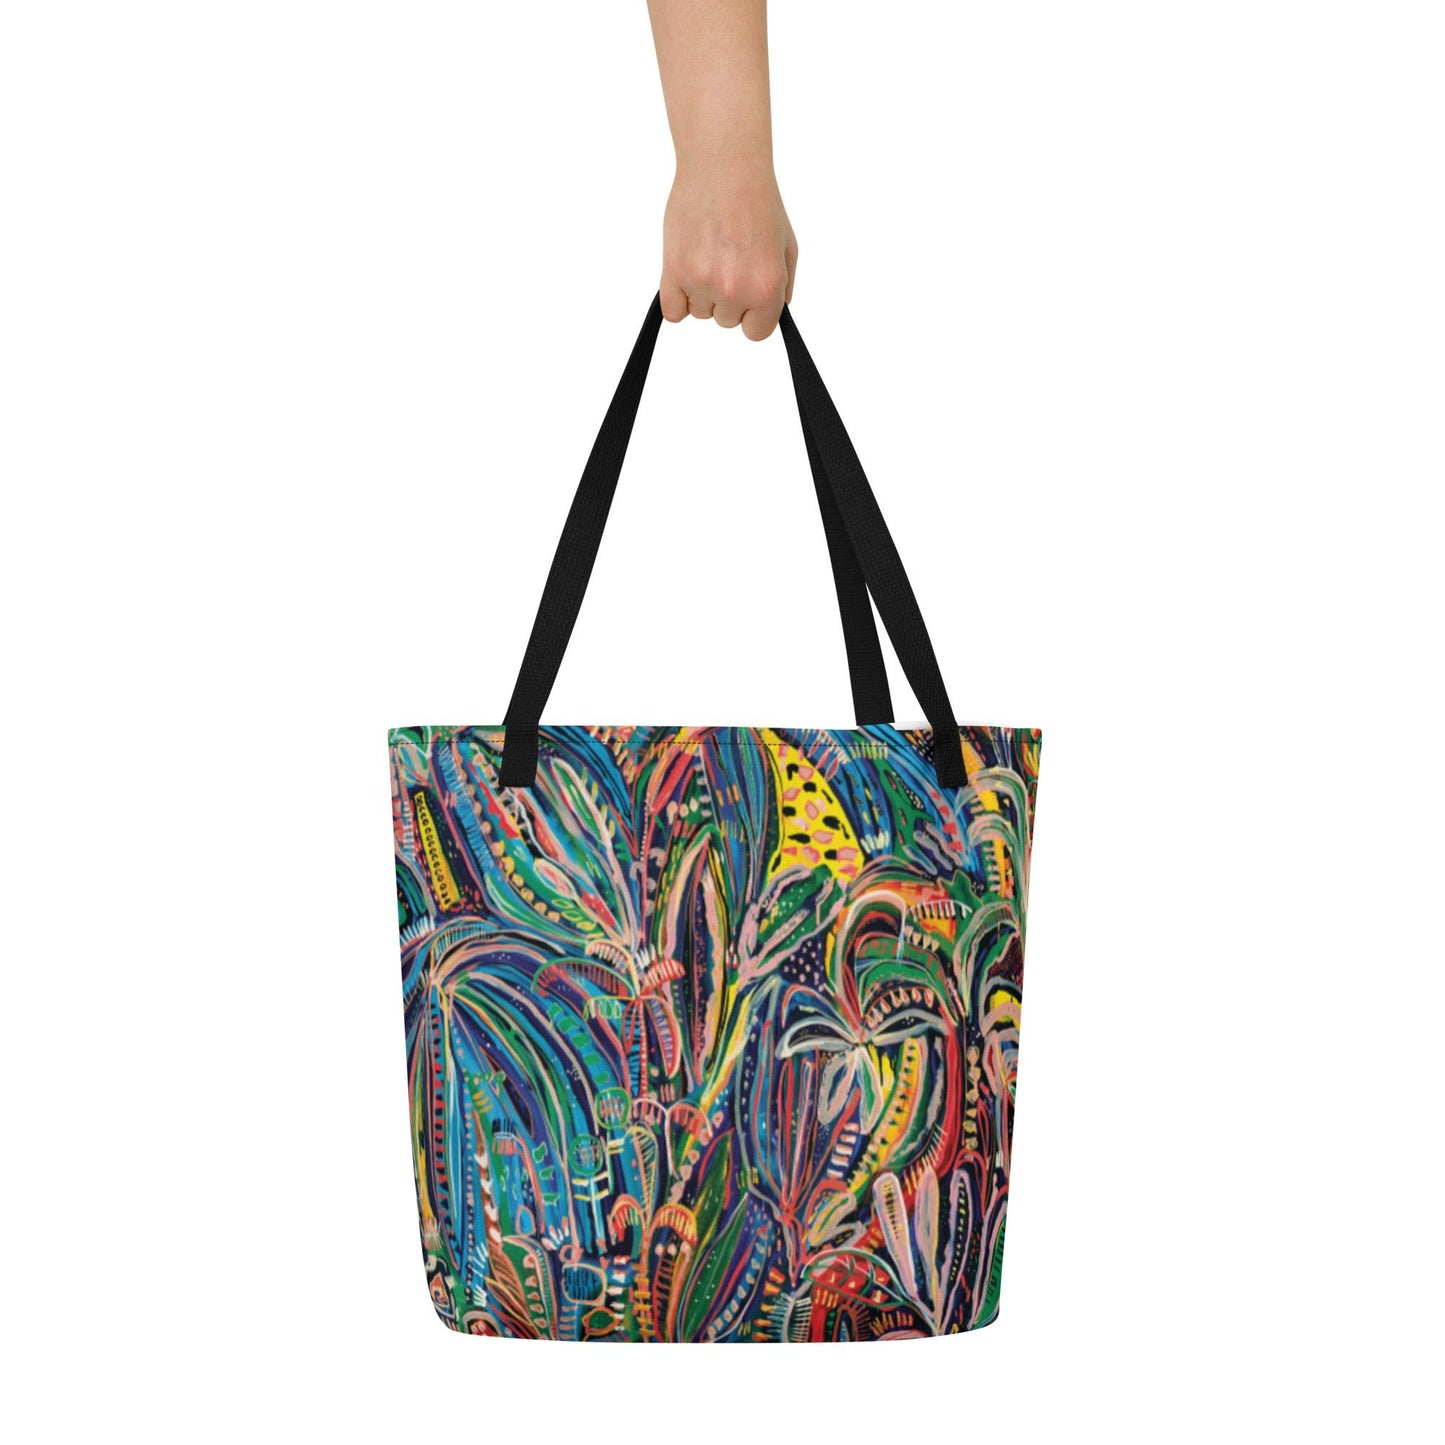 Club Tropicana Large Tote Bag with pocket - Milpali